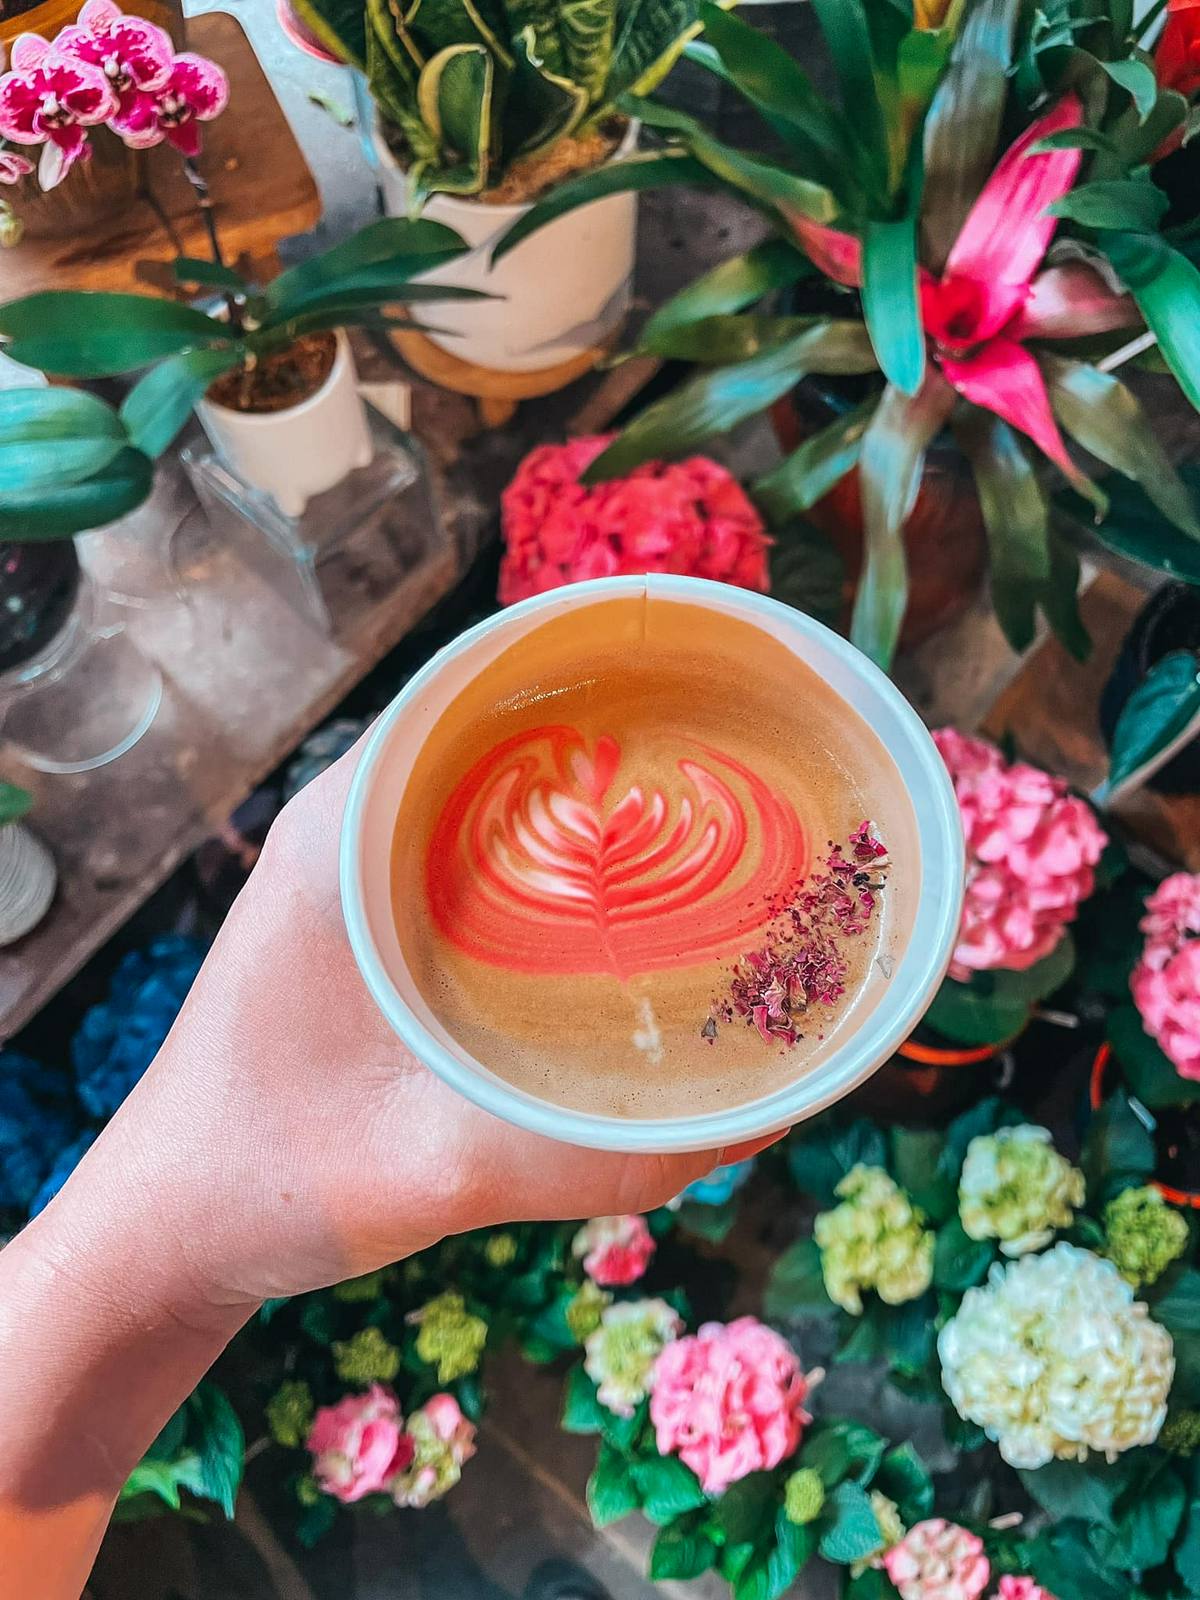 Rose latte from Remi43 Coffee shop in New York City